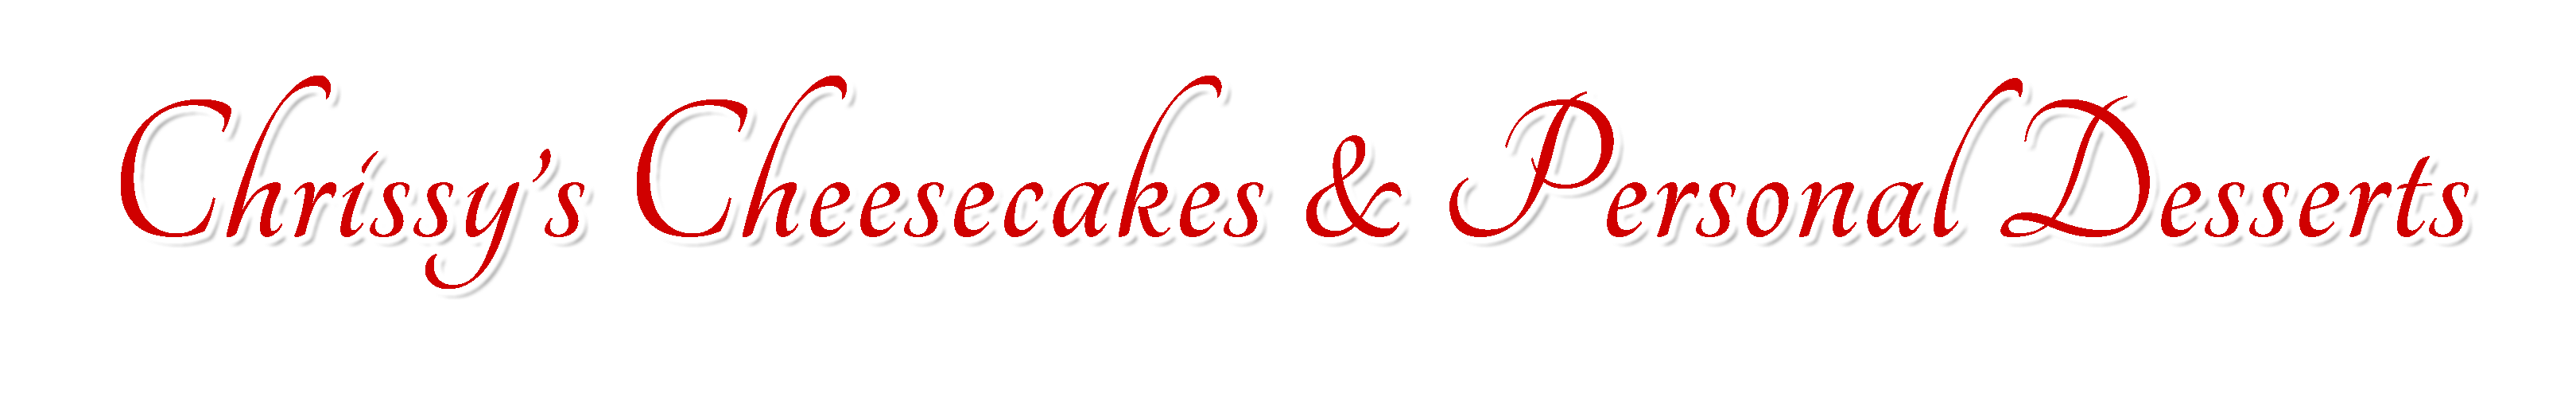 Chrissy's Cheesecakes and Personal Desserts Logo